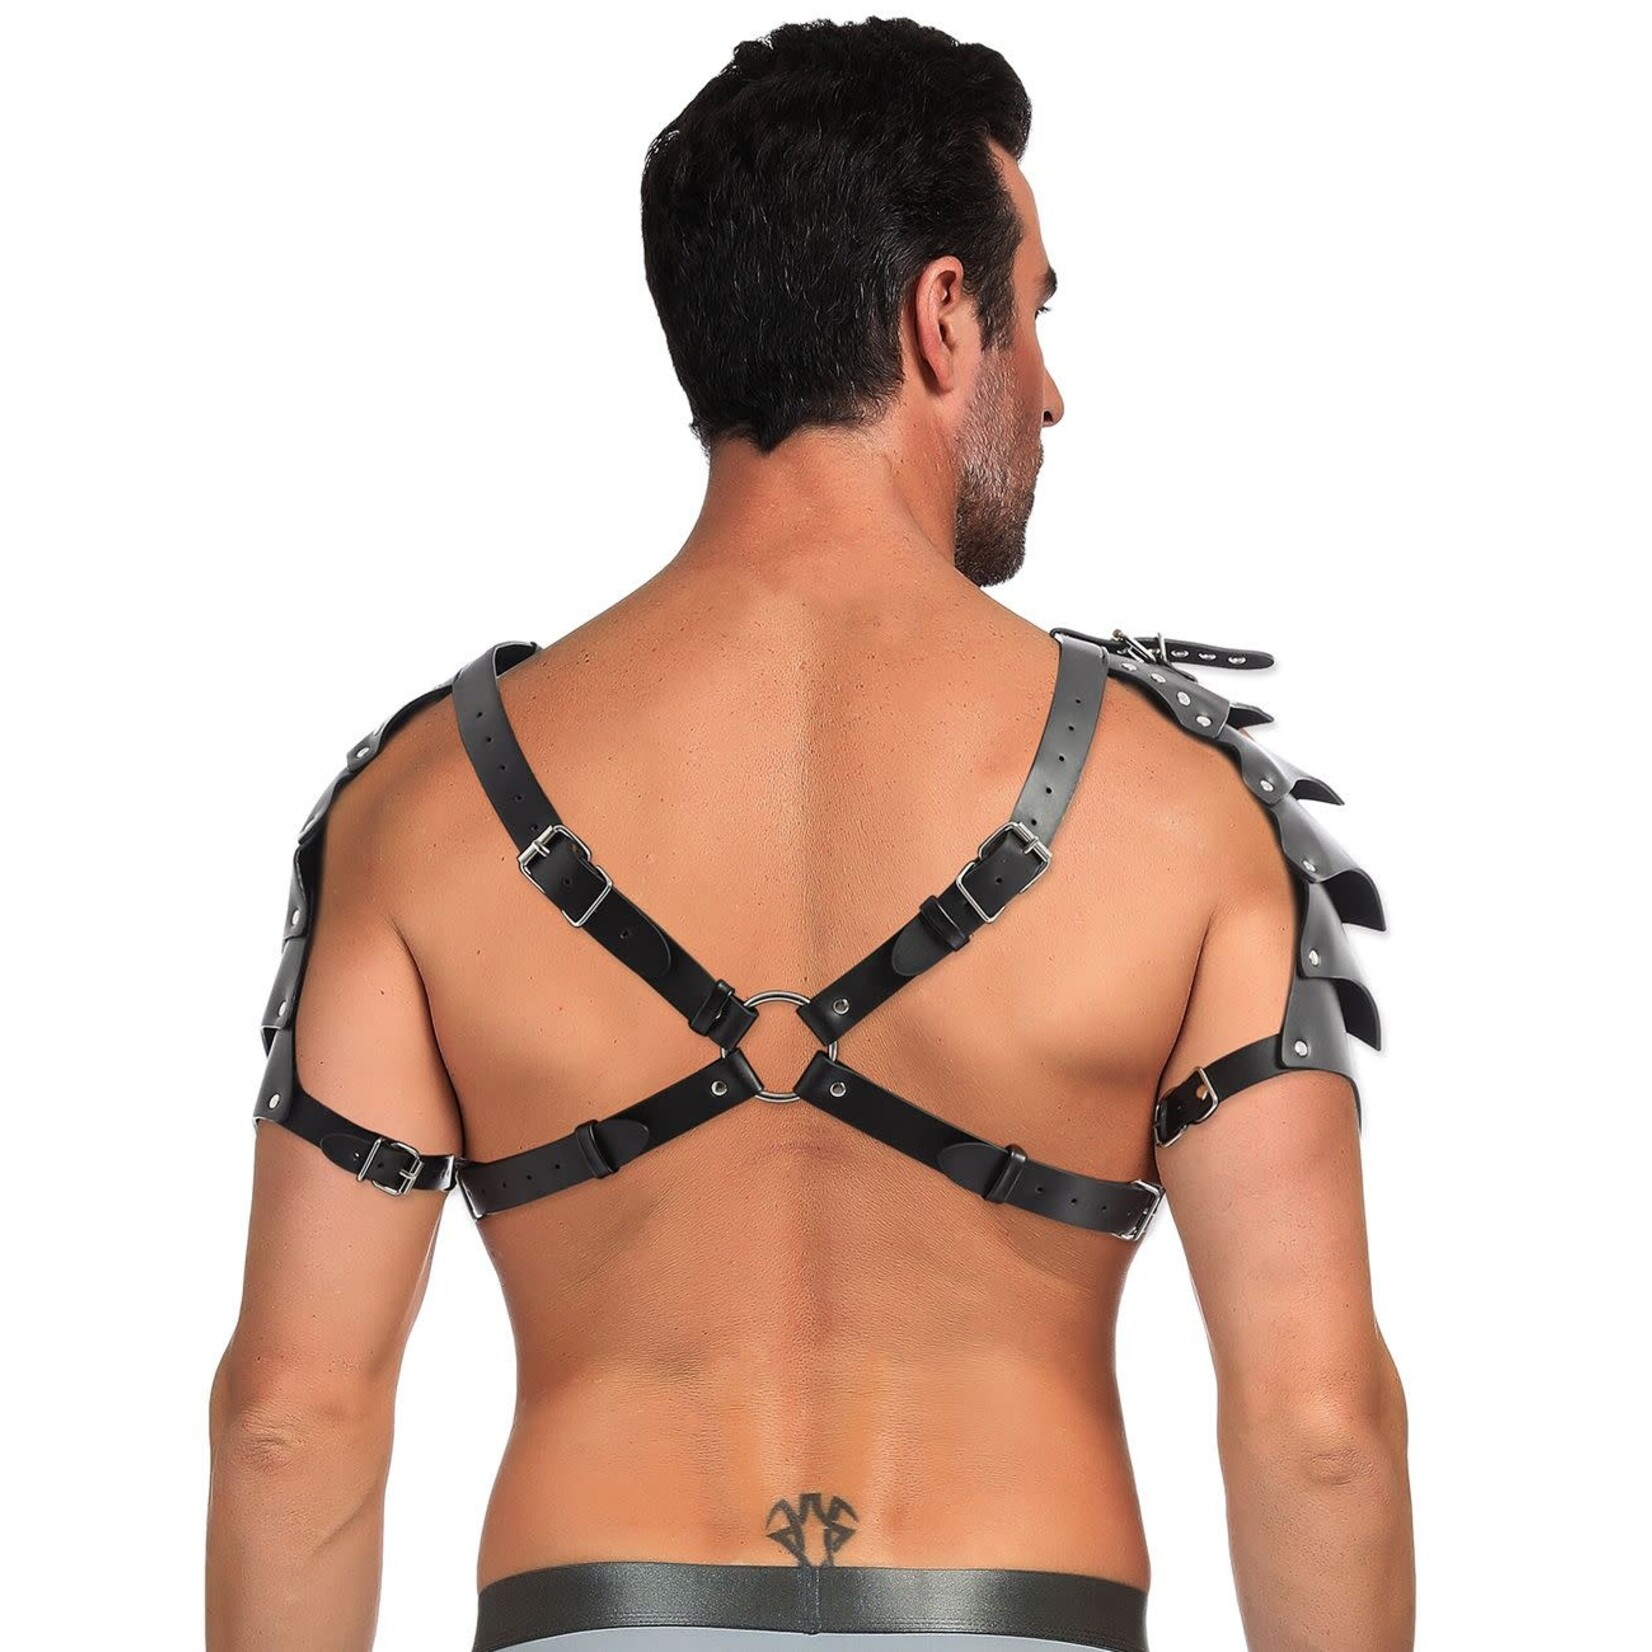 OH YEAH! -  MEN'S LEATHER ADJUSTABLE CHEST STRAP ONE SIZE